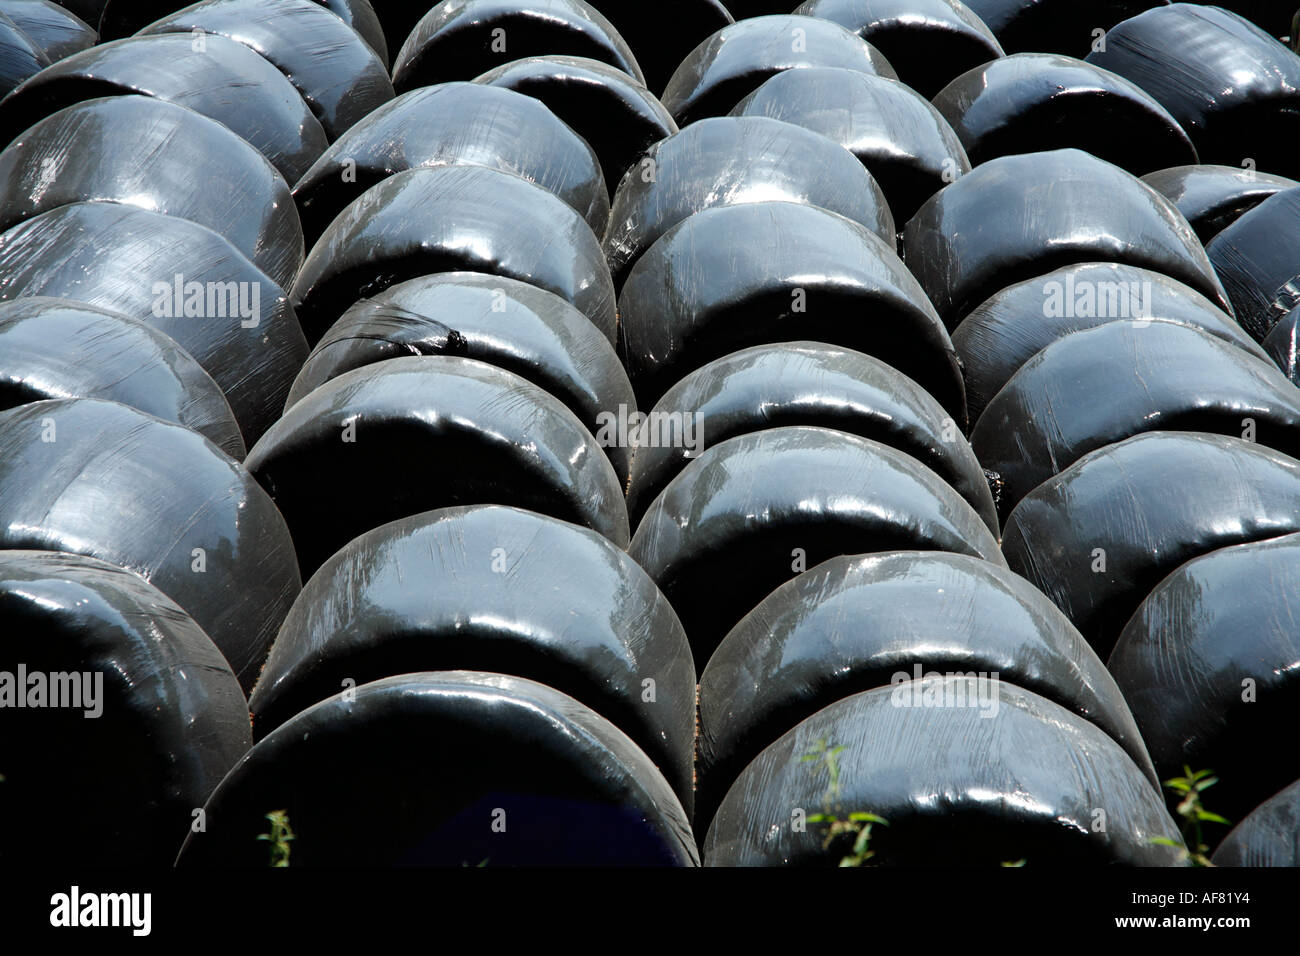 Bails of Hay in Large Black Plastic Bags Stock Photo